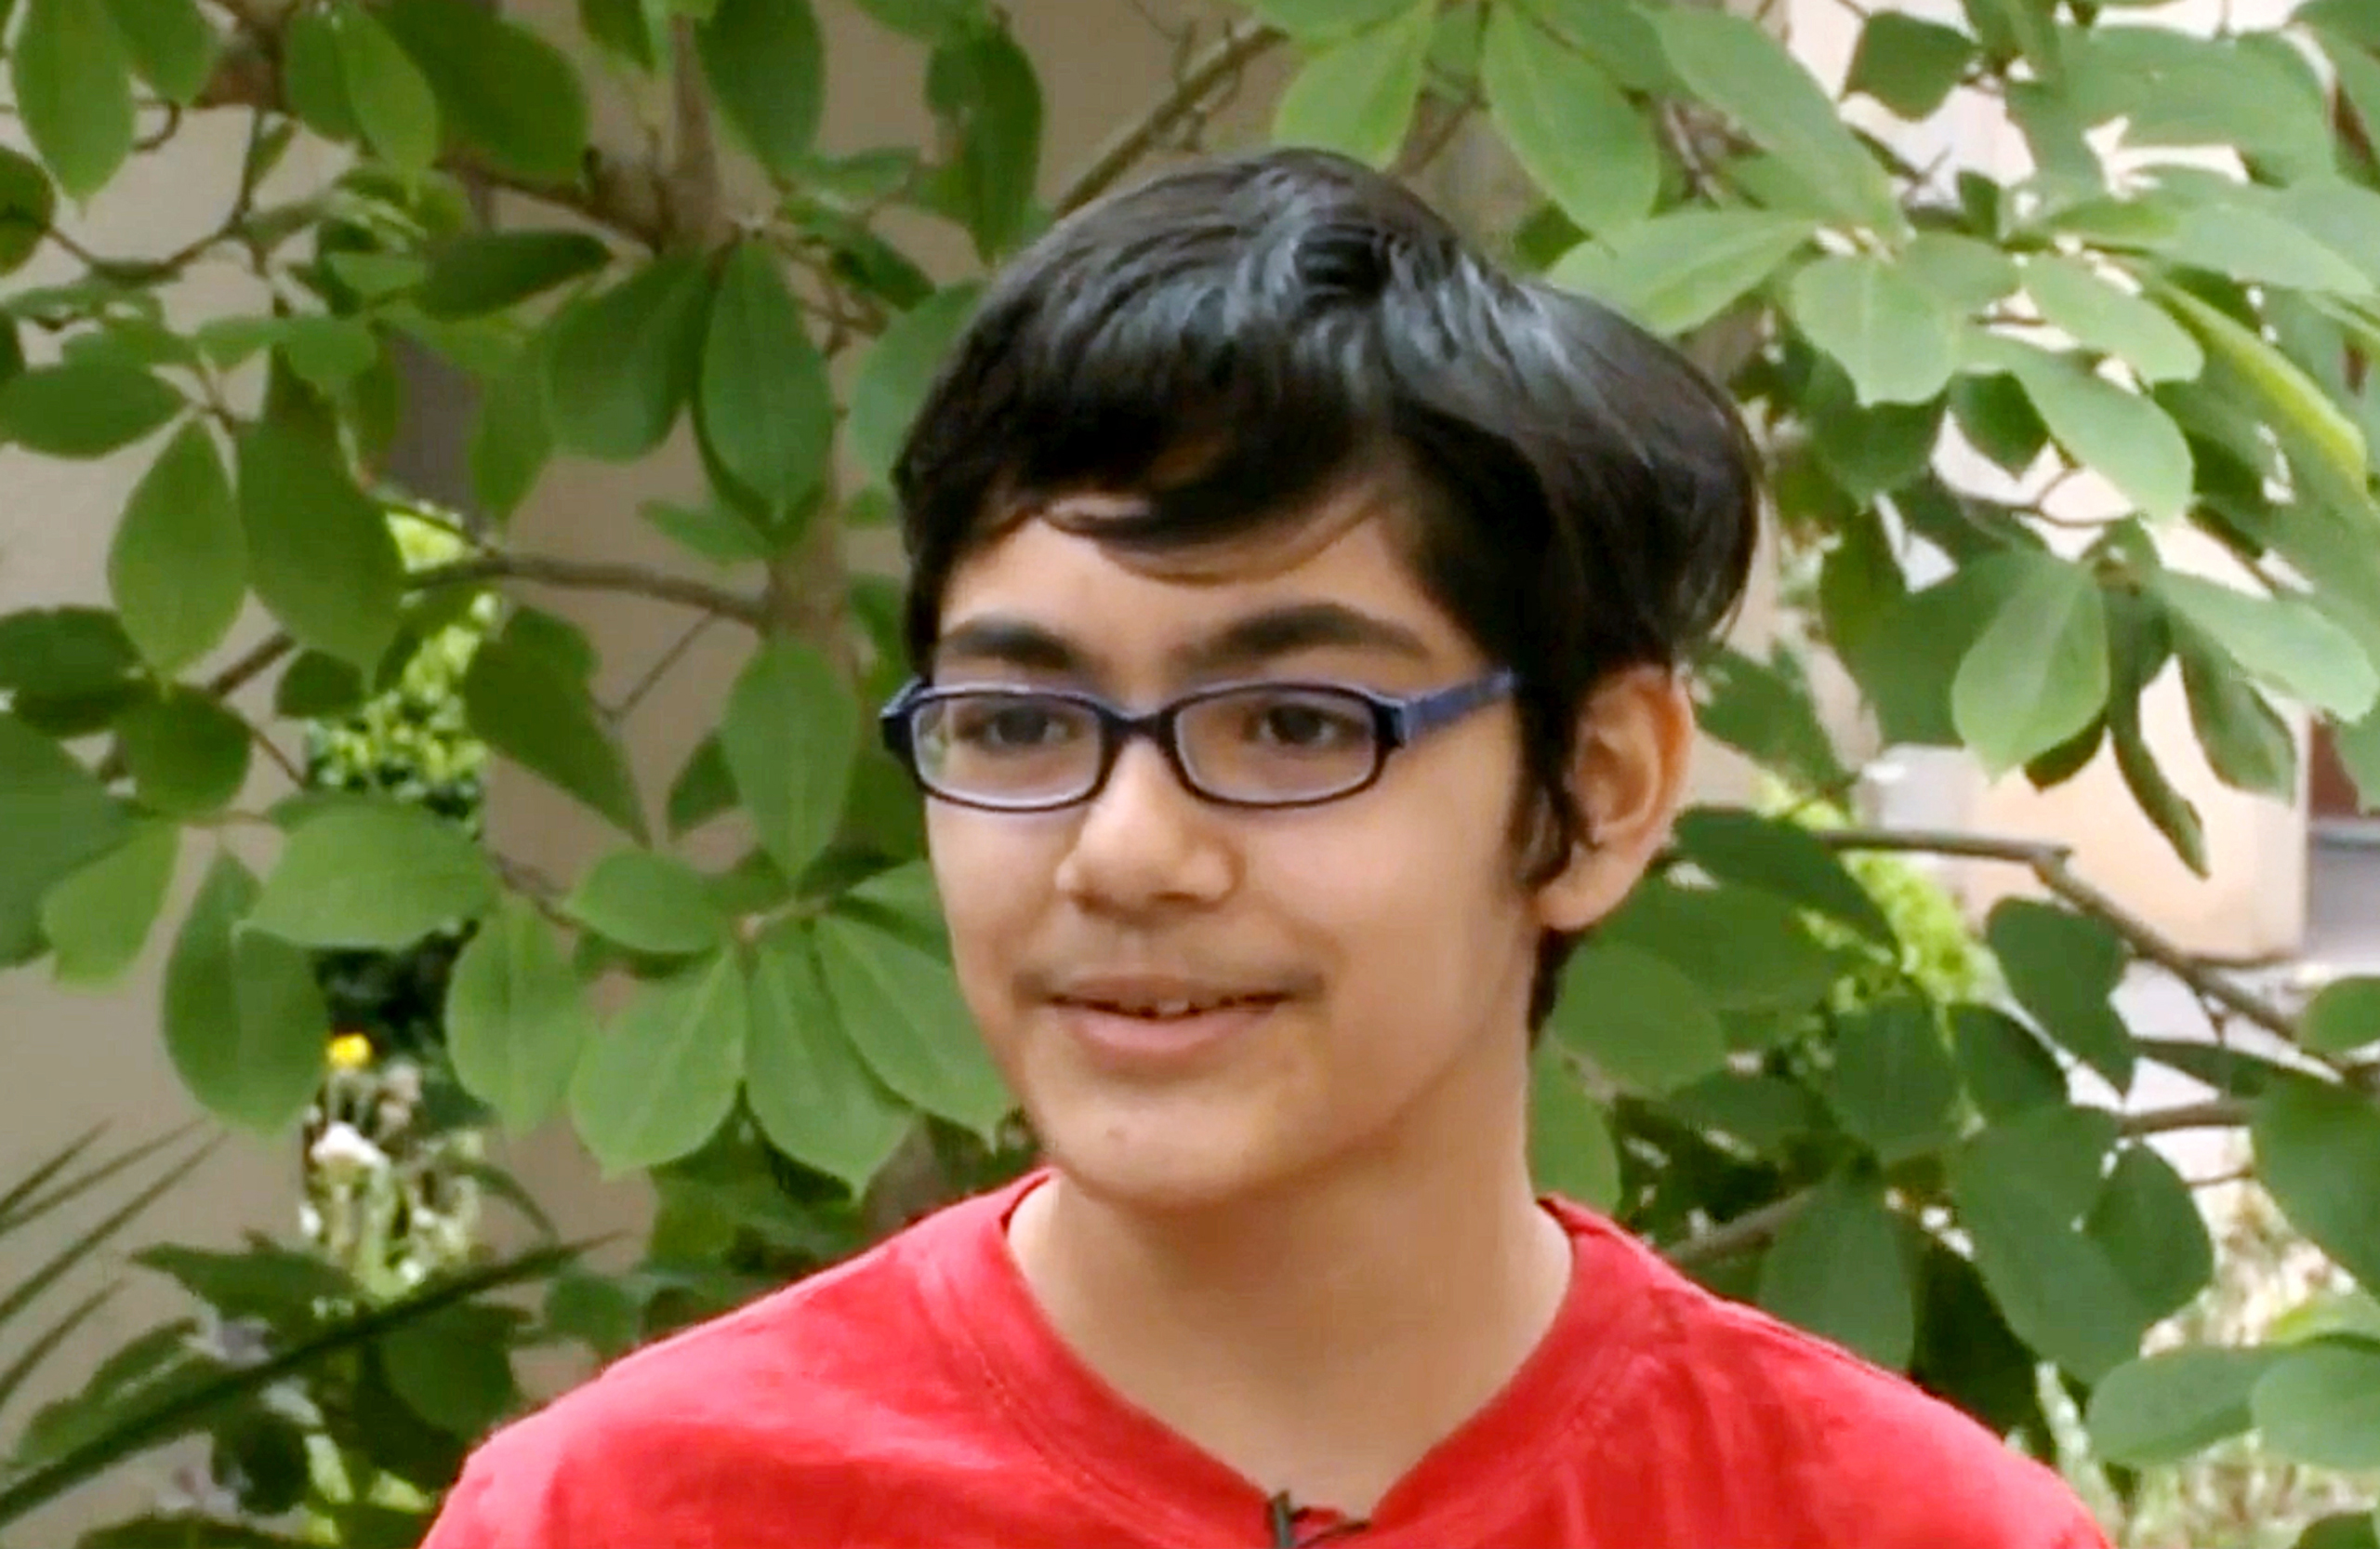 In this recent but undated frame from video provided by KOVR-TV, Tanishq Abraham, 12, talks about his recent graduation from community college and beginning his university education this fall, in an interview at American River College in Sacramento, Calif. He's been accepted to the University of California, Davis, and UC Santa Cruz. He says he plans on studying biomedical engineering and becoming a doctor and medical researcher by the time he turns 18. (KOVR-TV via AP) MANDATORY CREDIT TV OUT